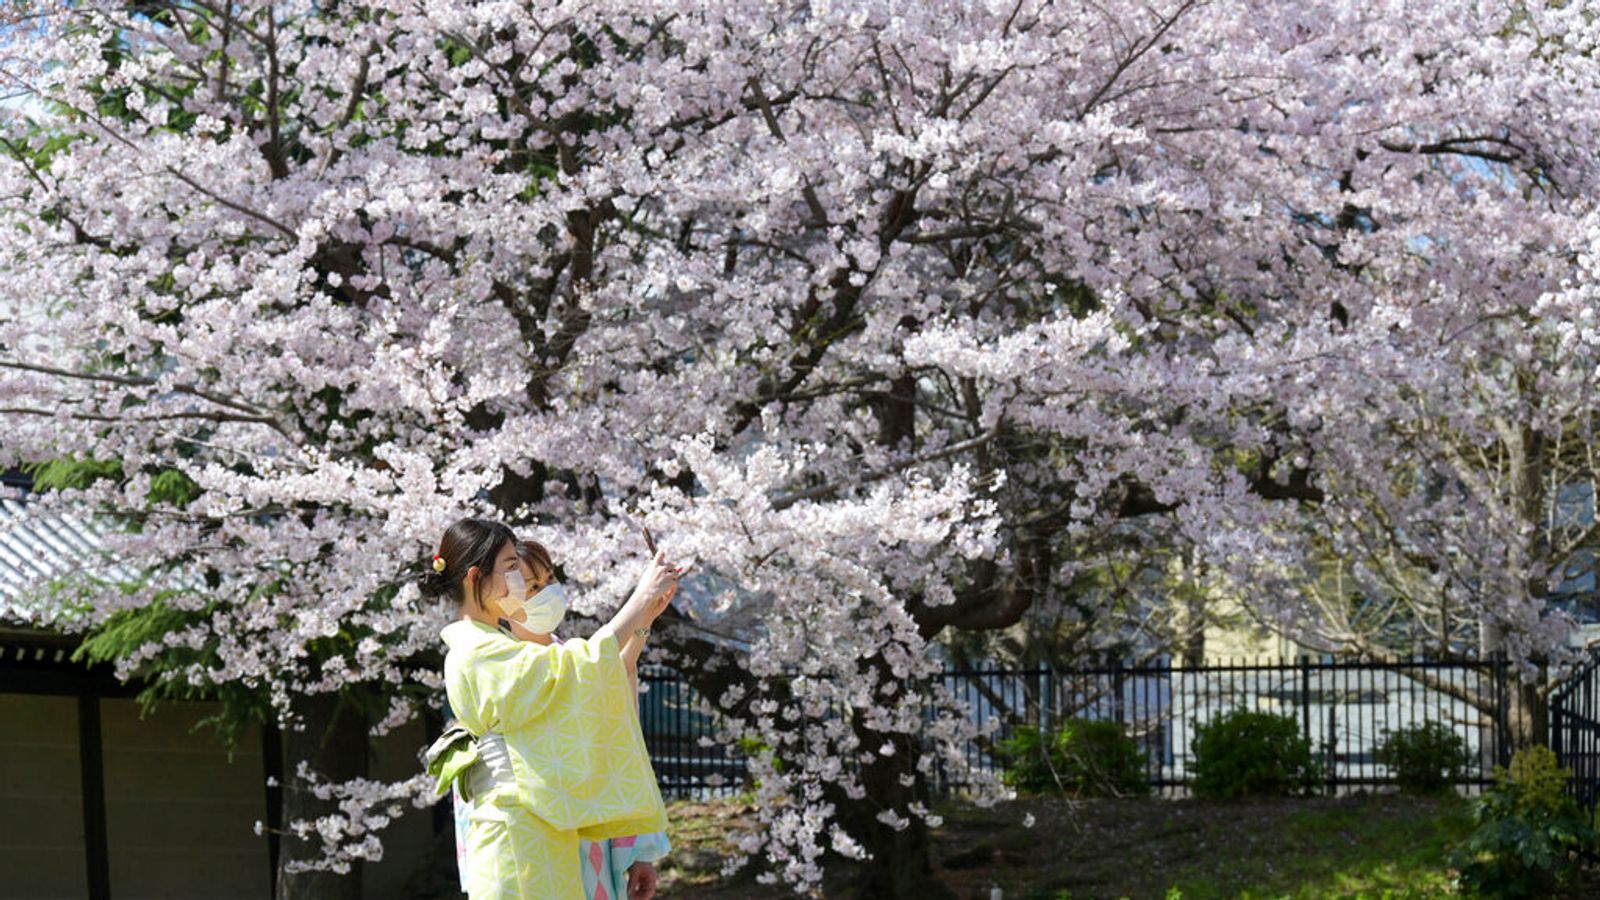 Climate crisis: Kyoto cherry blossom season shifted by global warming and urban development